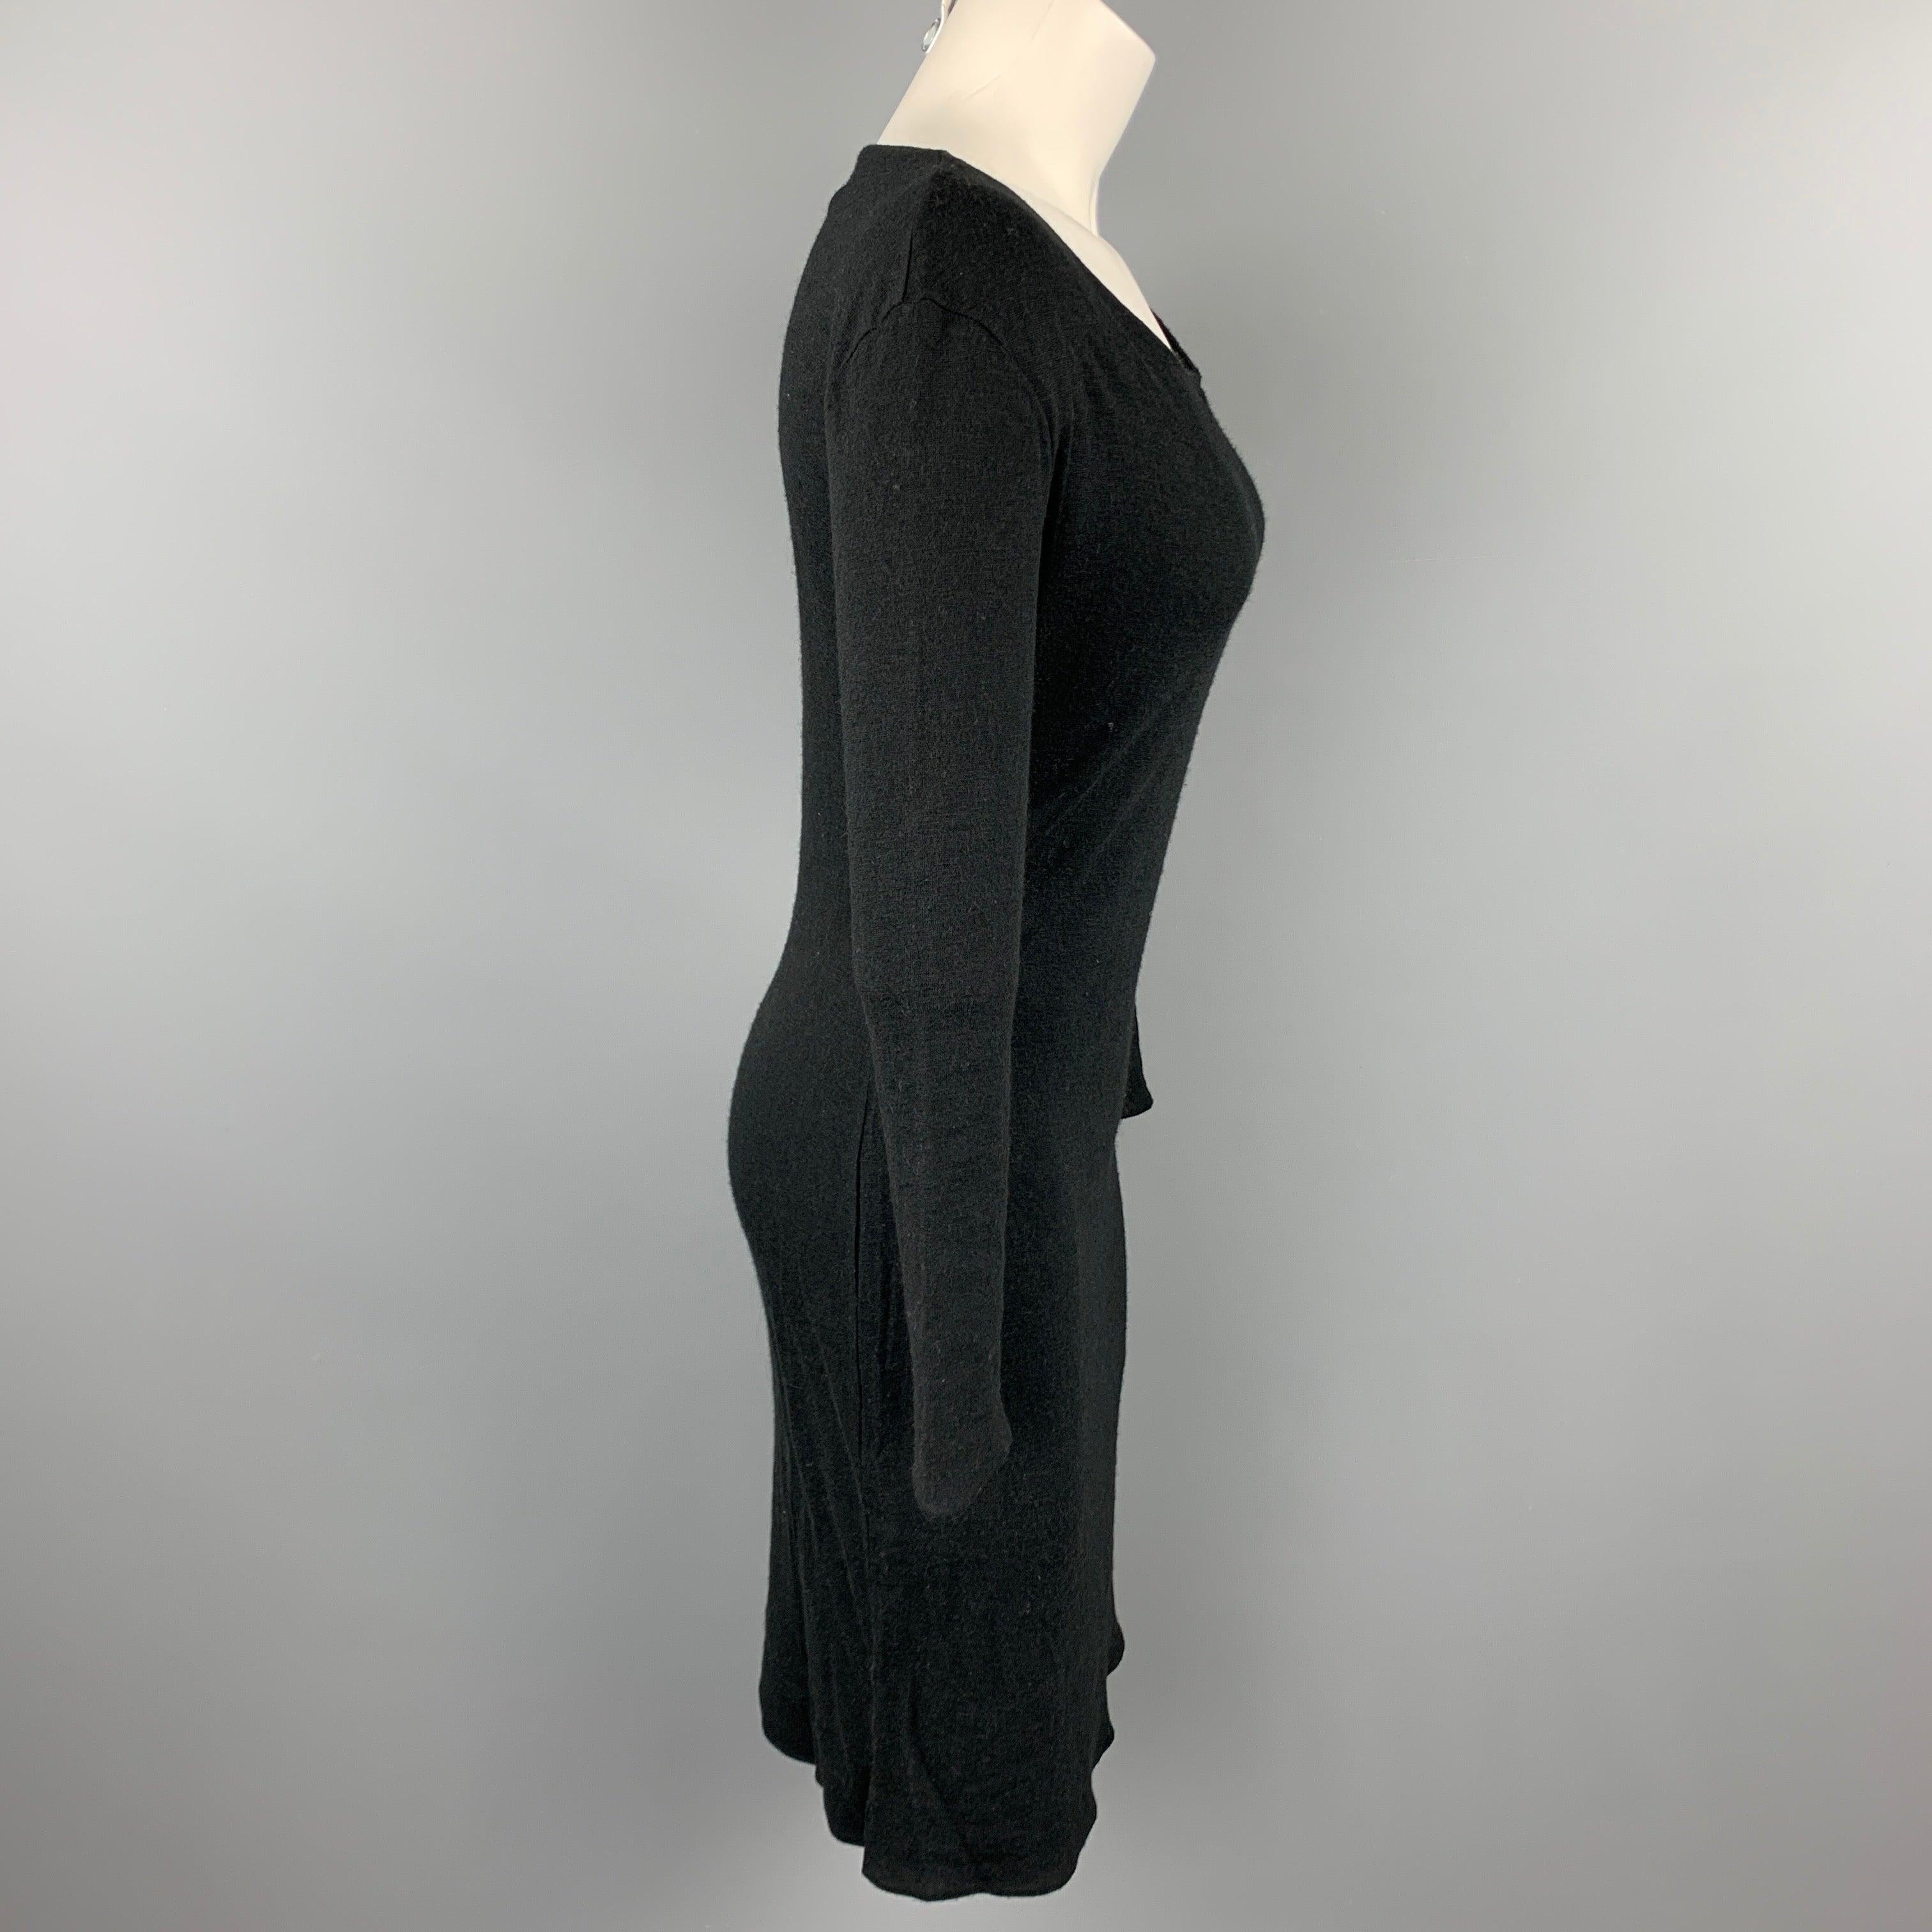 MAISON MARTIN MARGIELA sweater dress comes in a black viscose / wool featuring long sleeves and a front button closure detail. Made in Italy.Very Good
Pre-Owned Condition. 

Marked:   S 

Measurements: 
 
Shoulder: 18 inches Bust: 34 inches Waist: